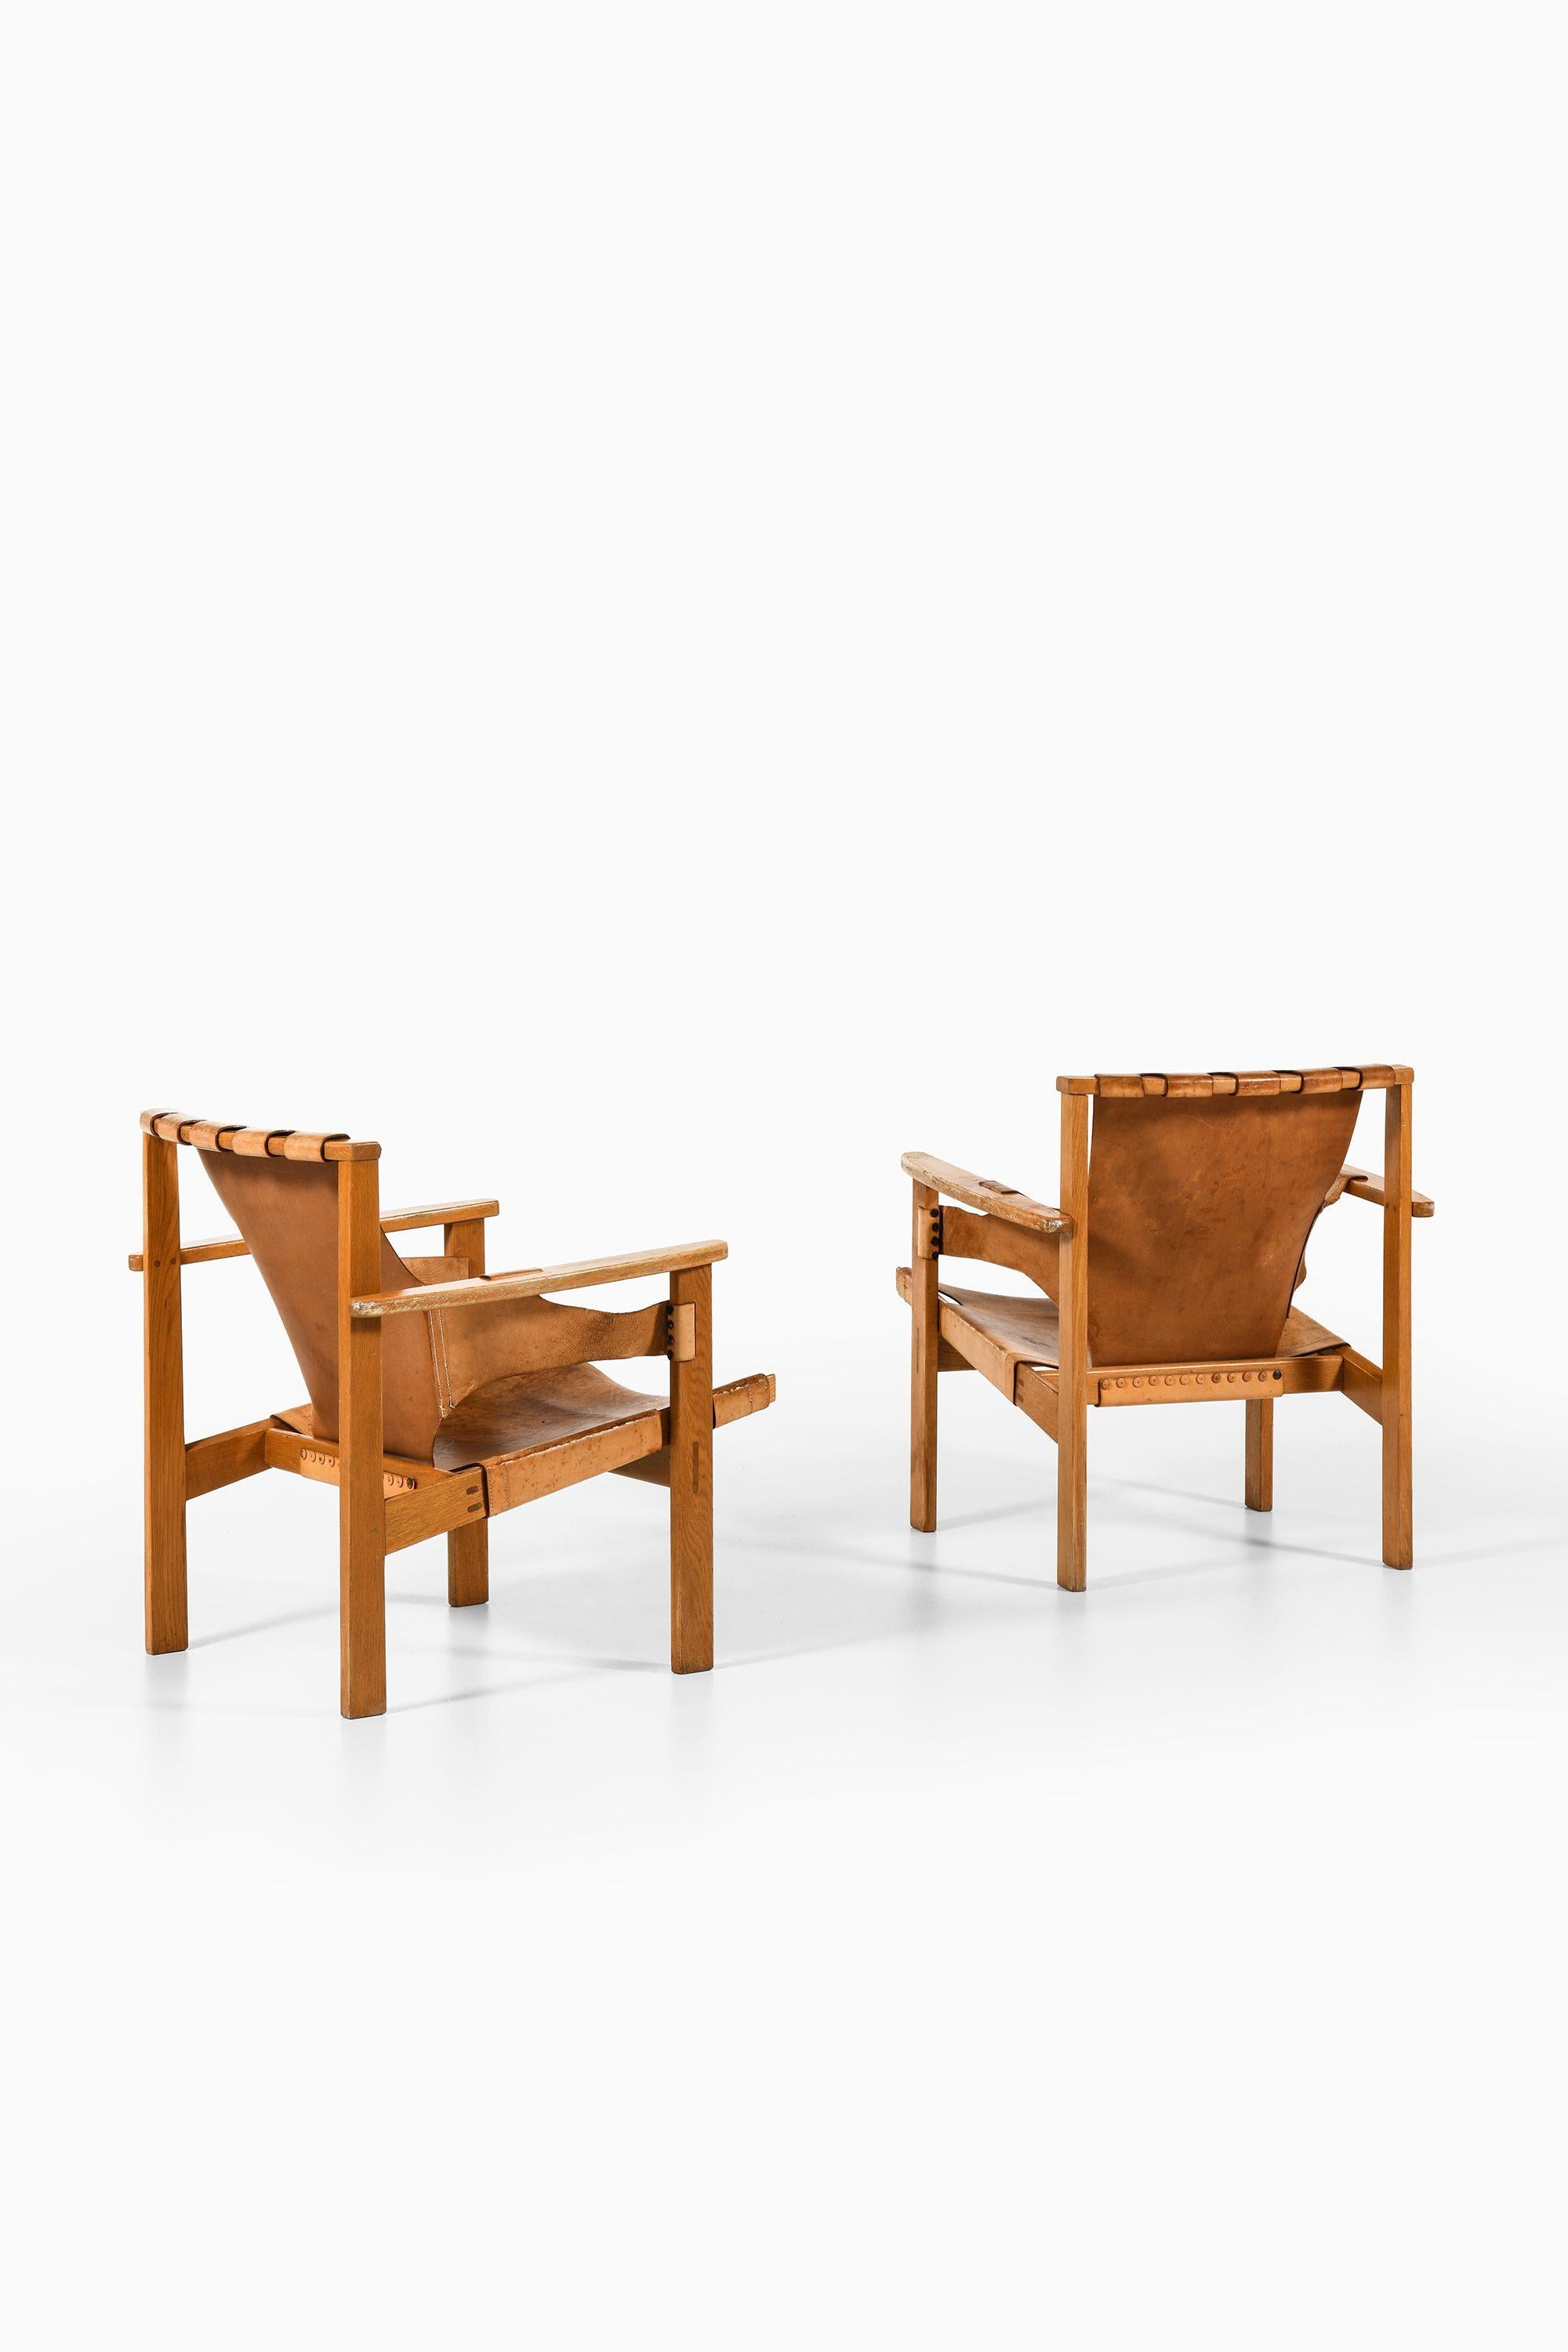 Pair of Trienna Easy Chairs in Oak & Original Leather by Carl-Axel Acking, 1957 In Good Condition For Sale In Limhamn, Skåne län